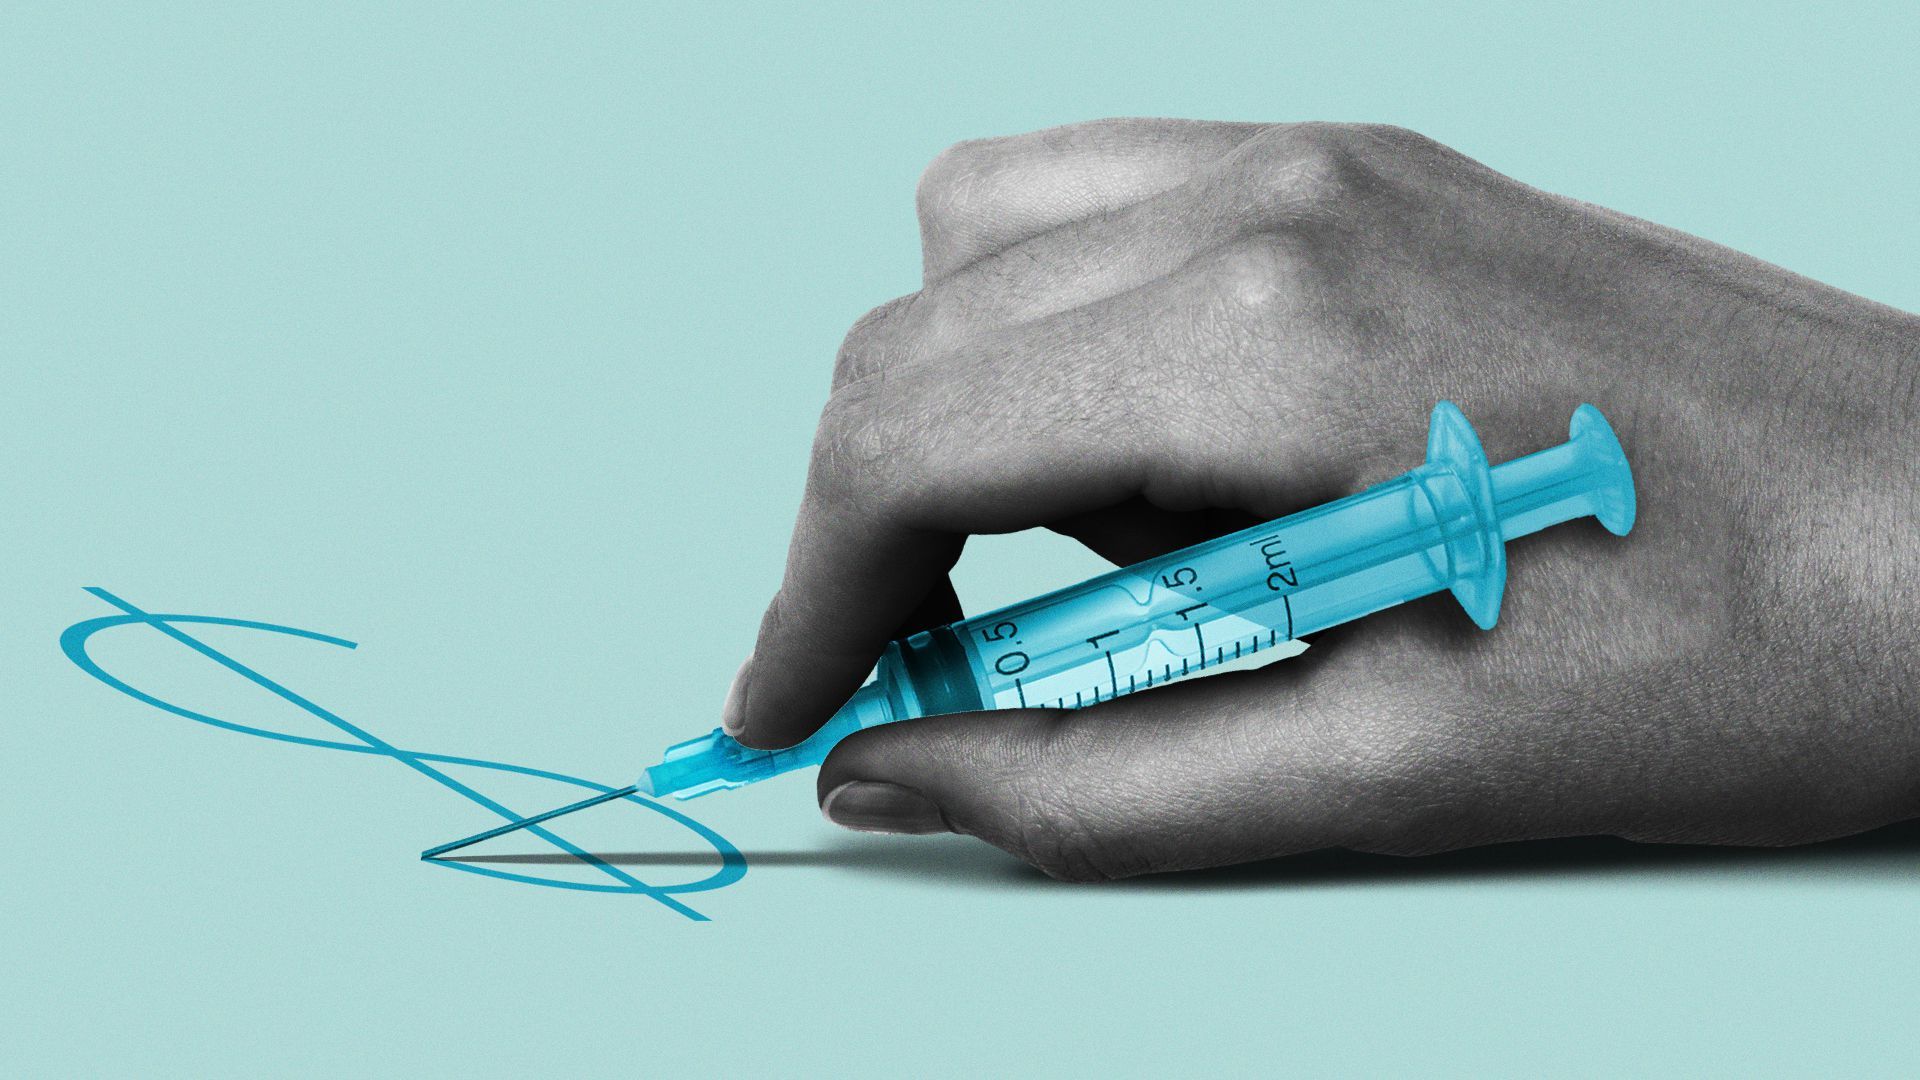 Illustration of a hand holding a syringe as a pen and writing a dollar sign.